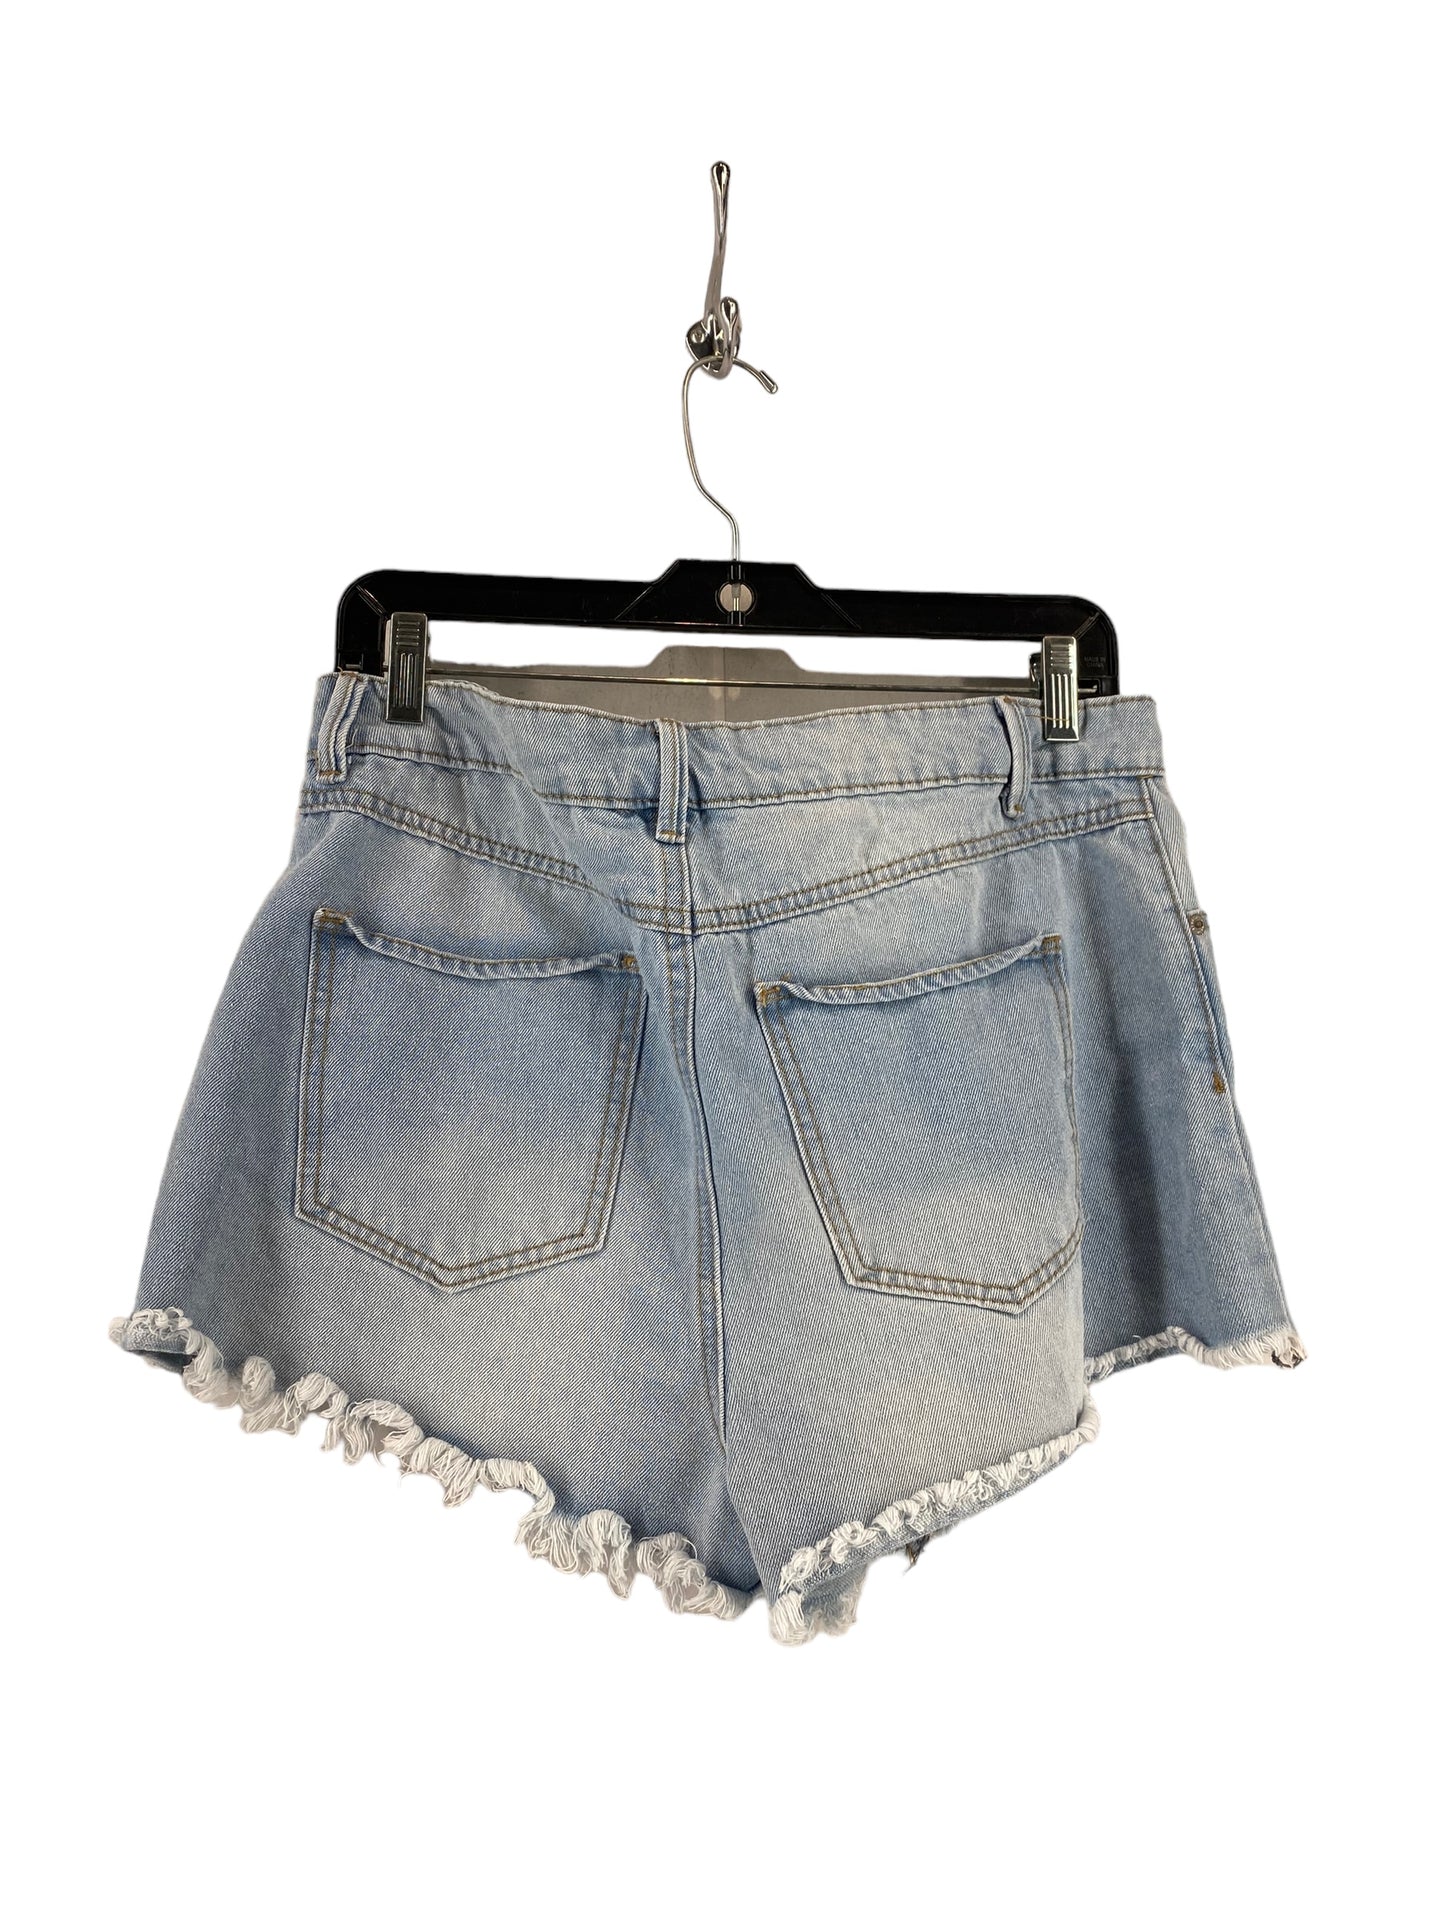 Shorts By Clothes Mentor  Size: 11